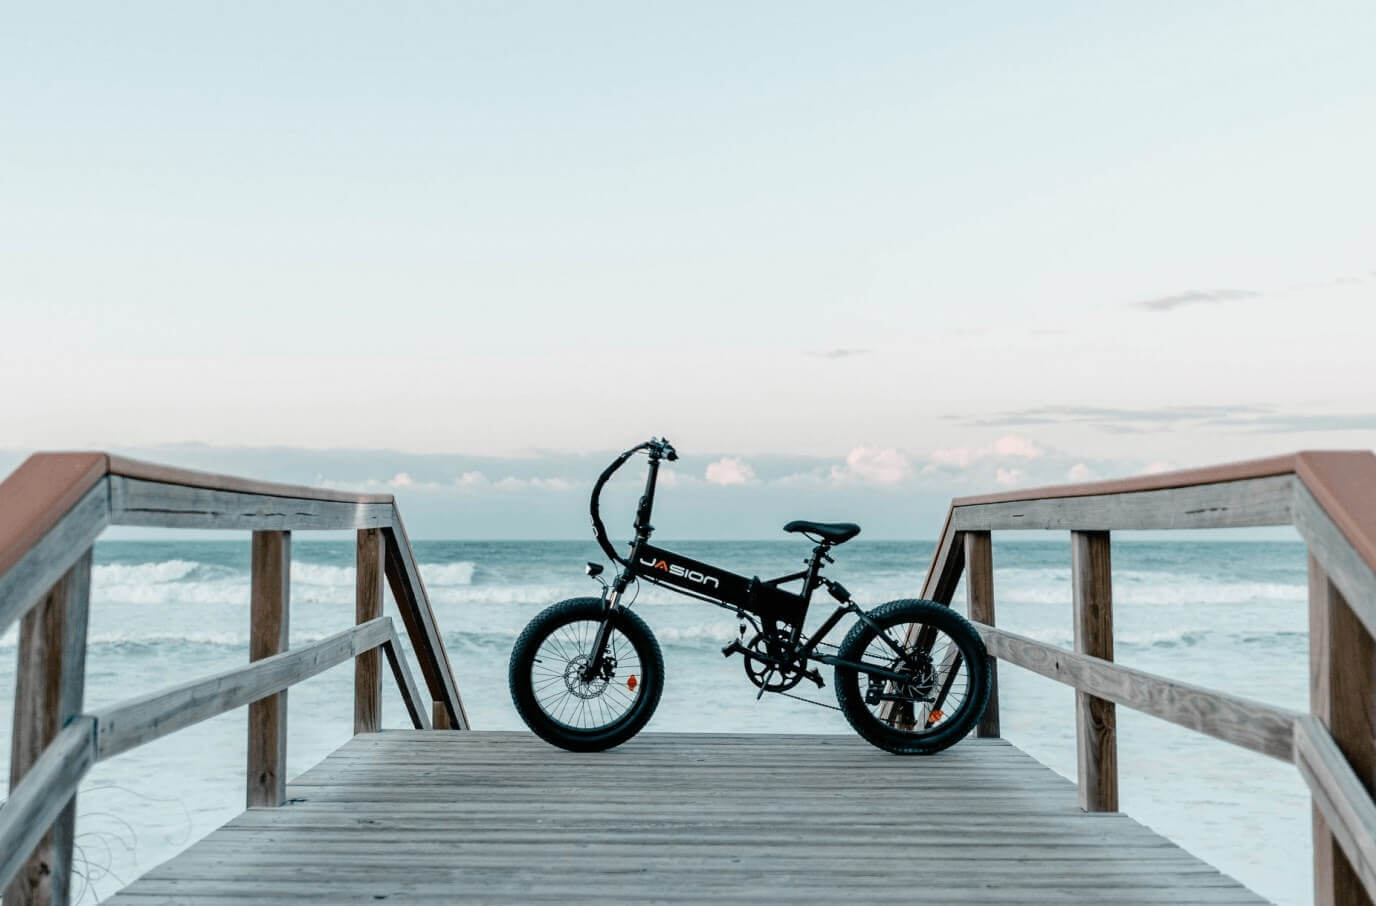 Electric Bike 101: An Introduction to E-Bikes